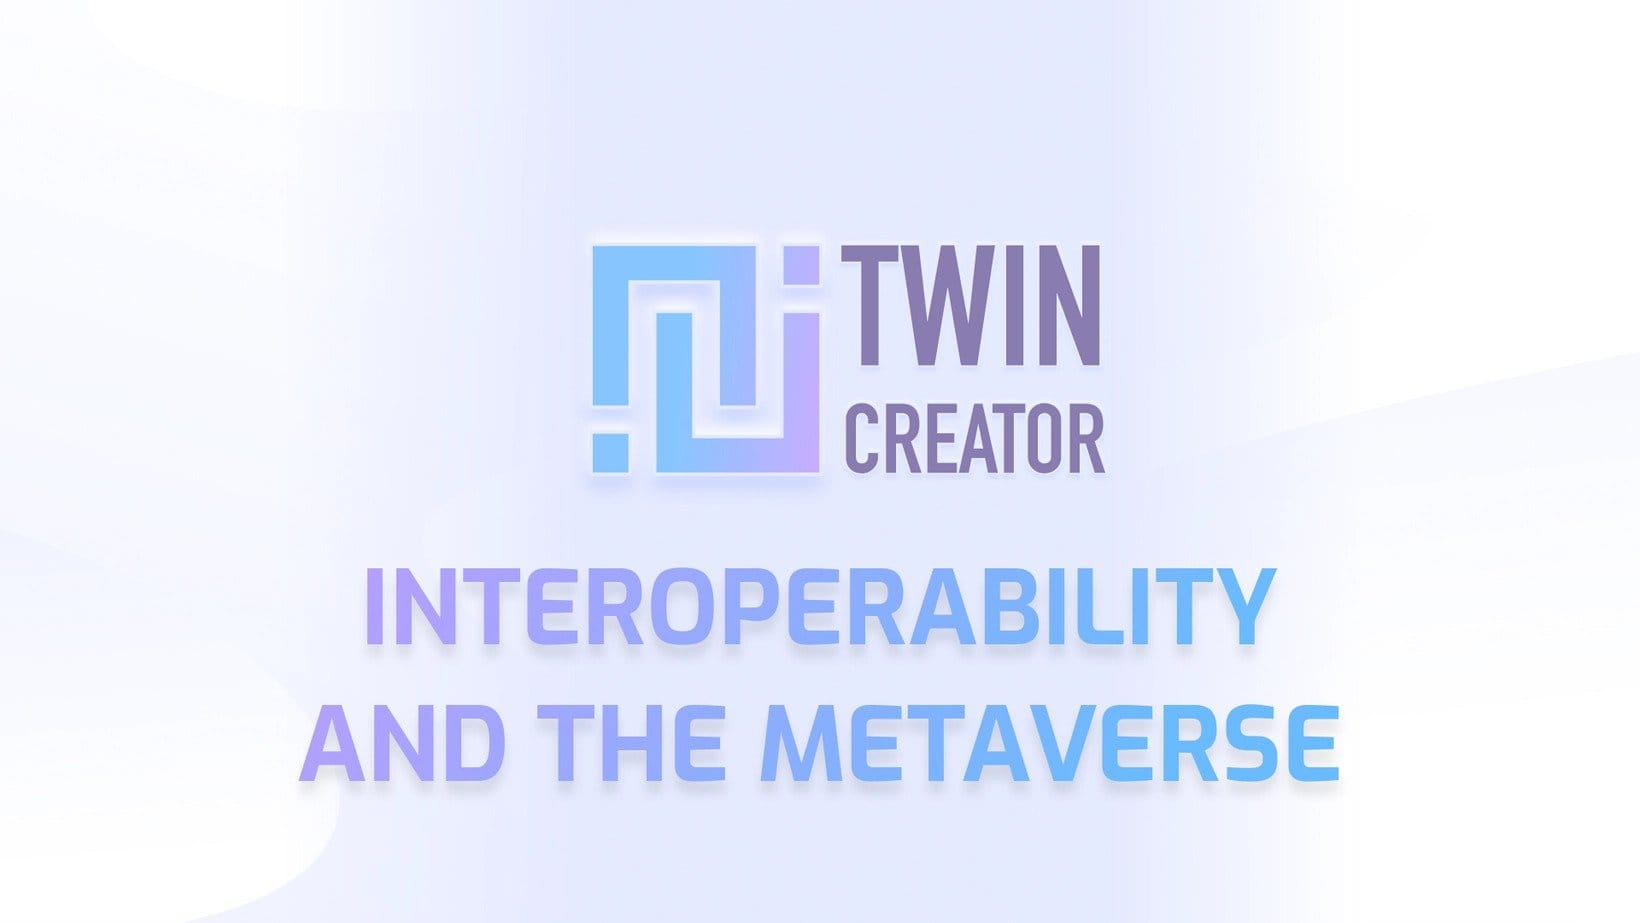 Interoperability and the Metaverse: what it is and why it matters